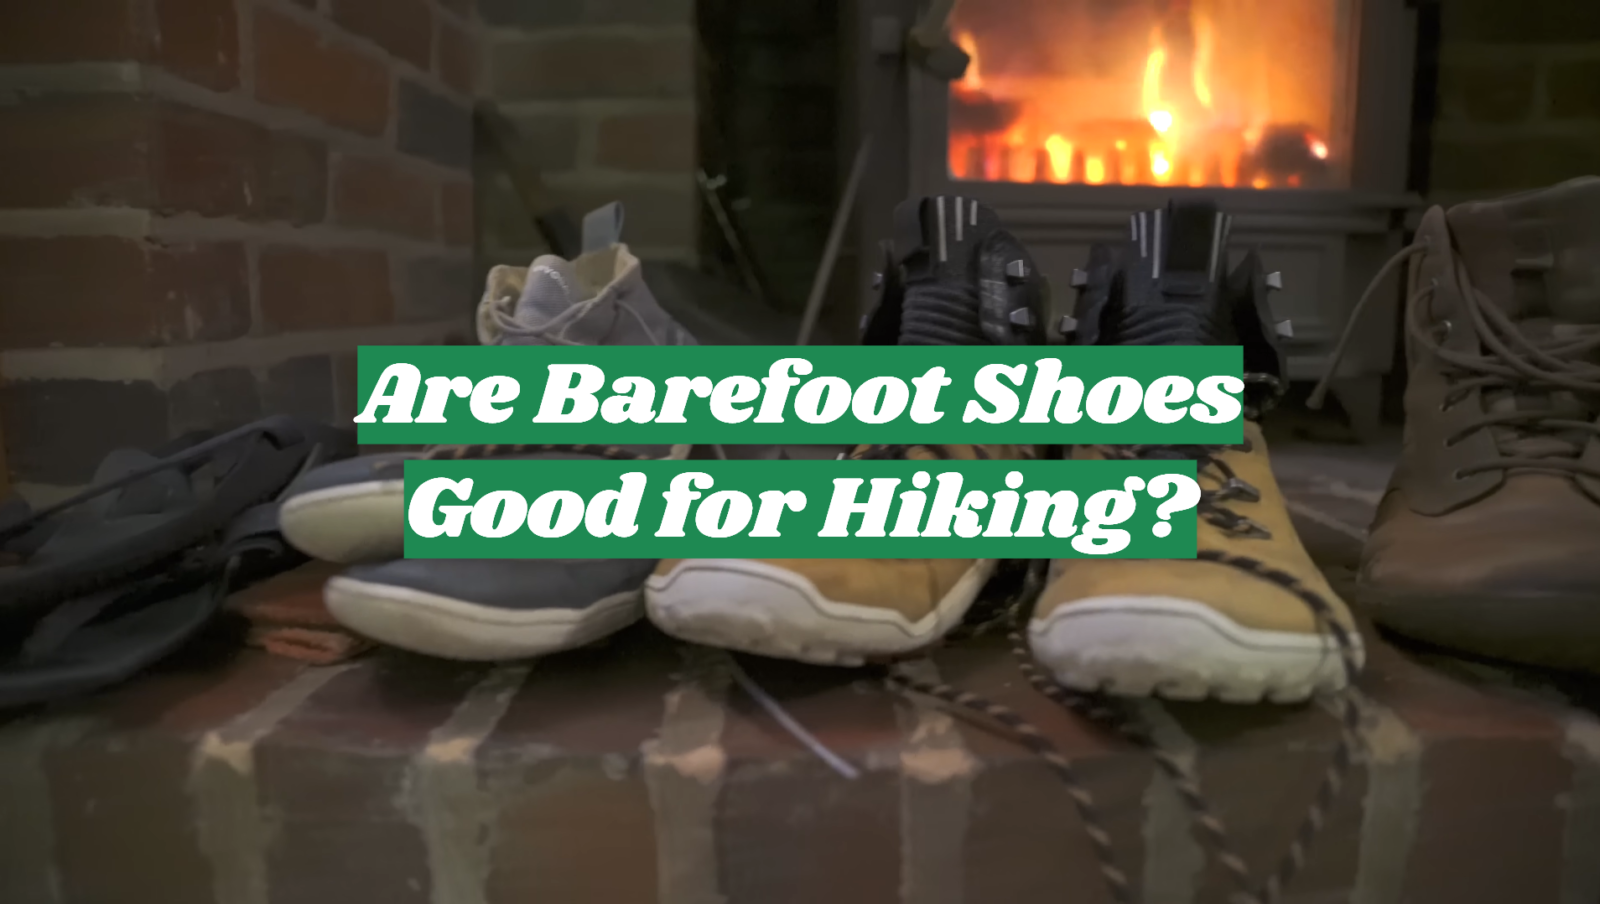 Are Barefoot Shoes Good for Hiking?